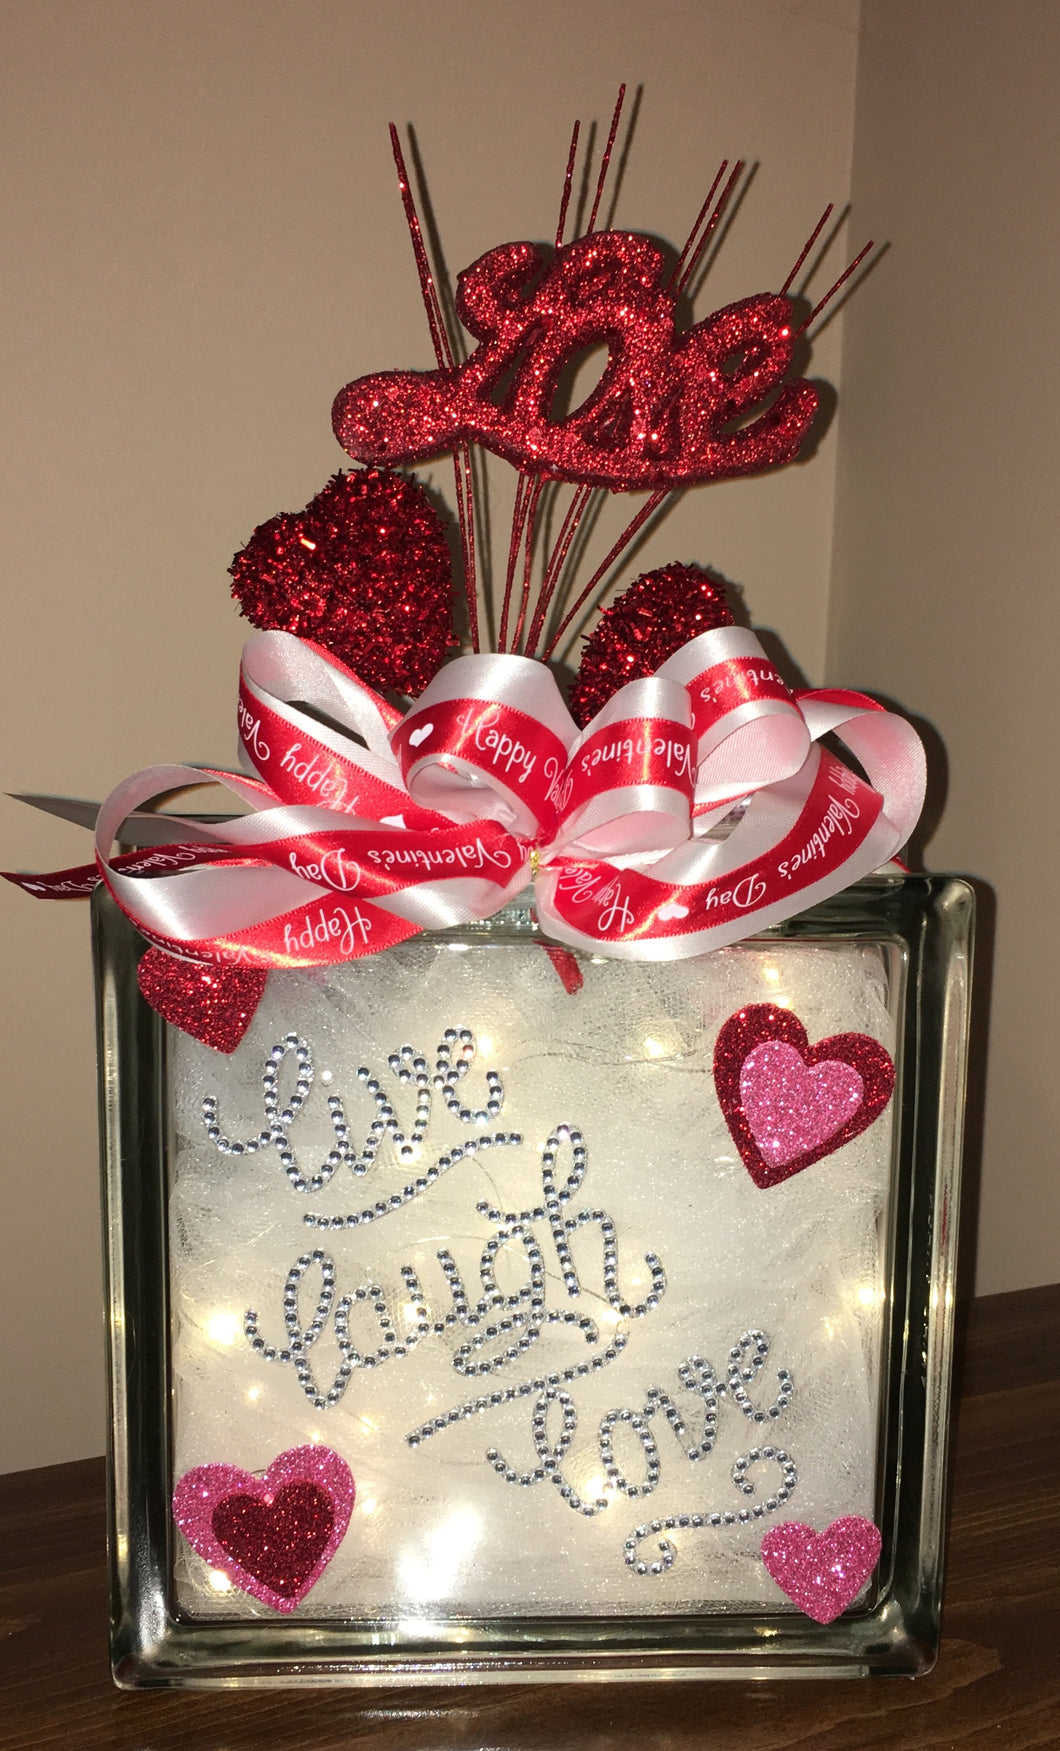 This Valentine's Day Block lights up with battery-operated lights. We can customize a saying and add names with vinyl-only not rhinestones. We can design this block the way you want with different colors. This is a double-sided block that can be placed anywhere or in any room to decorate for Valentine's Day! Decorative picks and ribbons may vary.